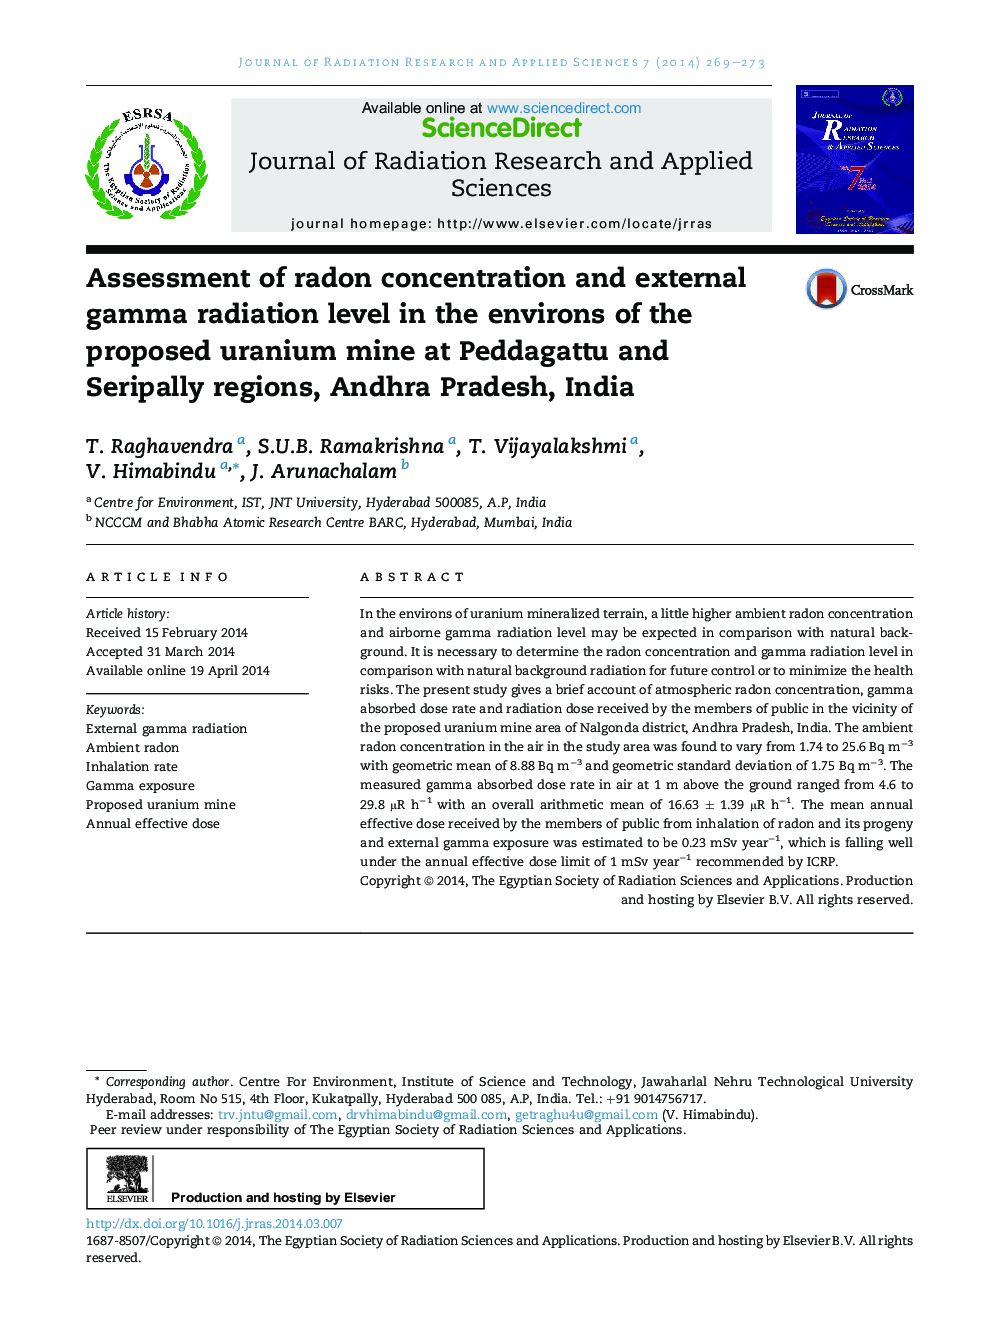 Assessment of radon concentration and external gamma radiation level in the environs of the proposed uranium mine at Peddagattu and Seripally regions, Andhra Pradesh, India 